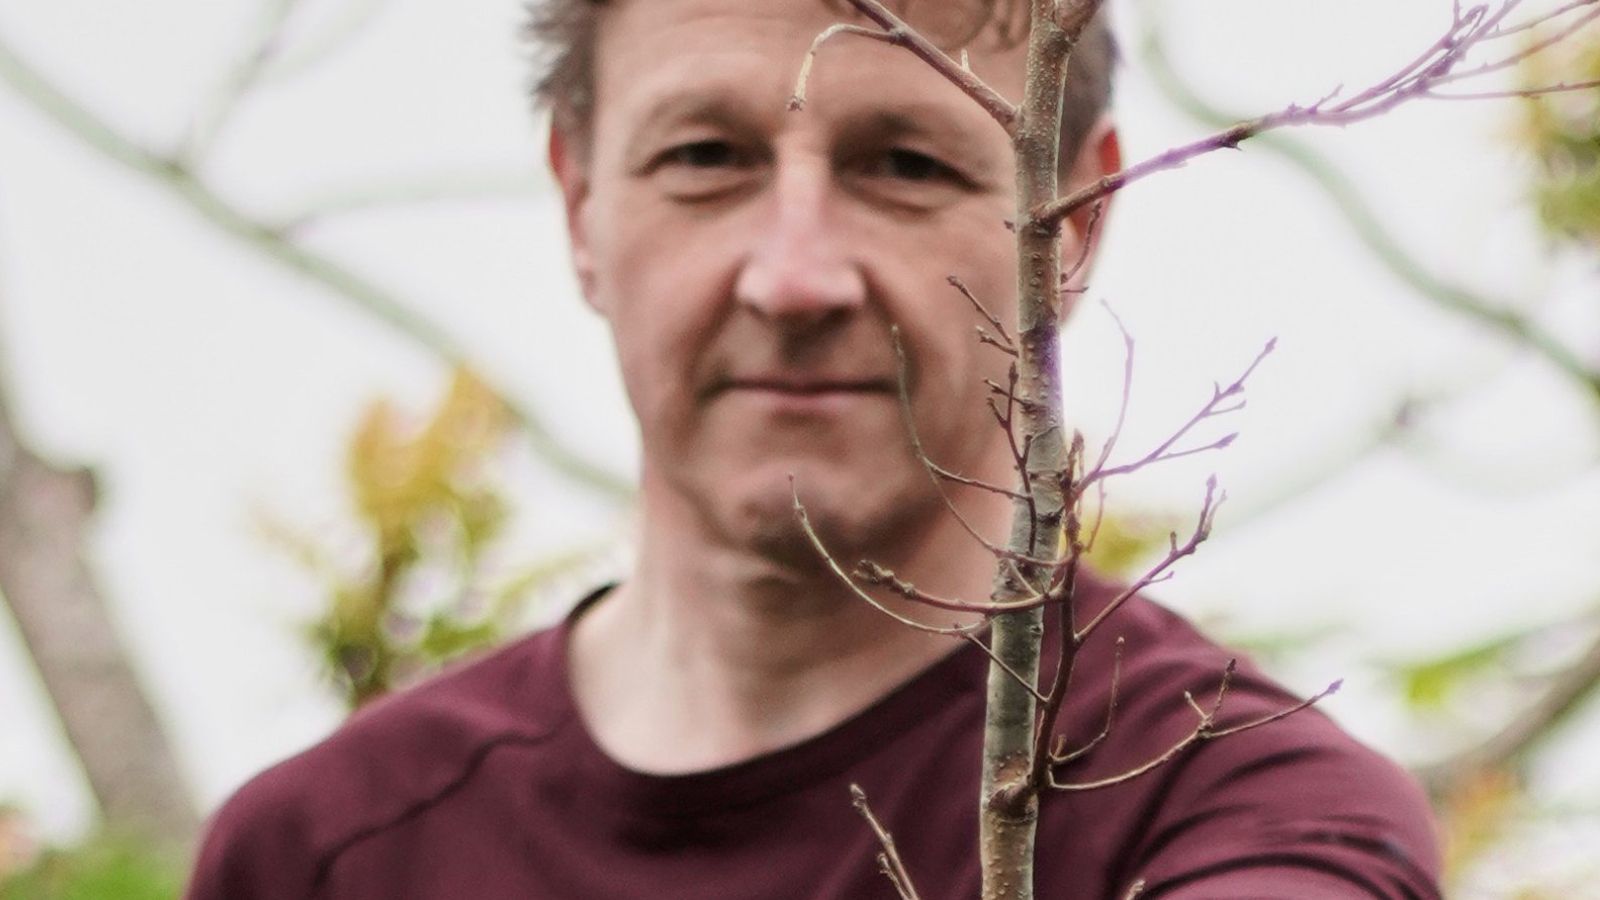 A man stands facing the camera holding a twig in his hand